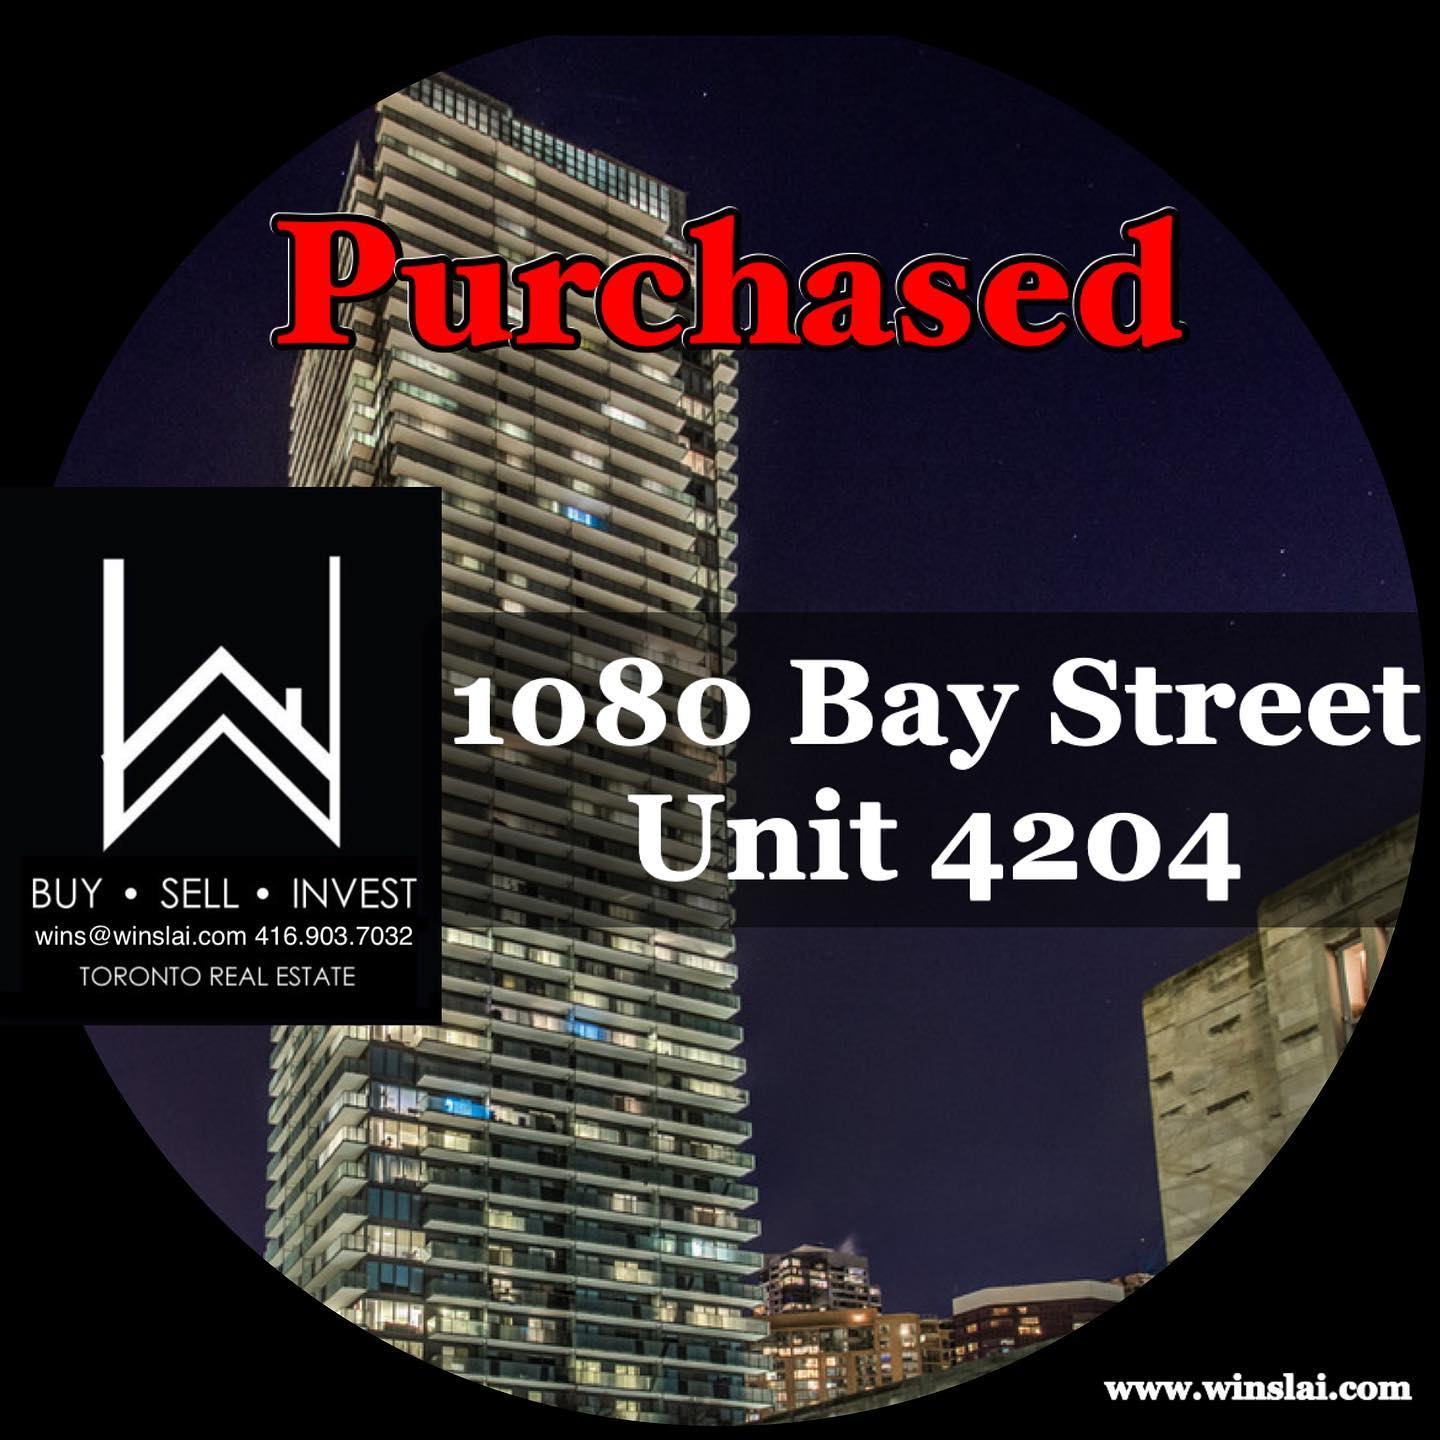 Purchased flyer for 1080 Bay St Unit 4204 codo.